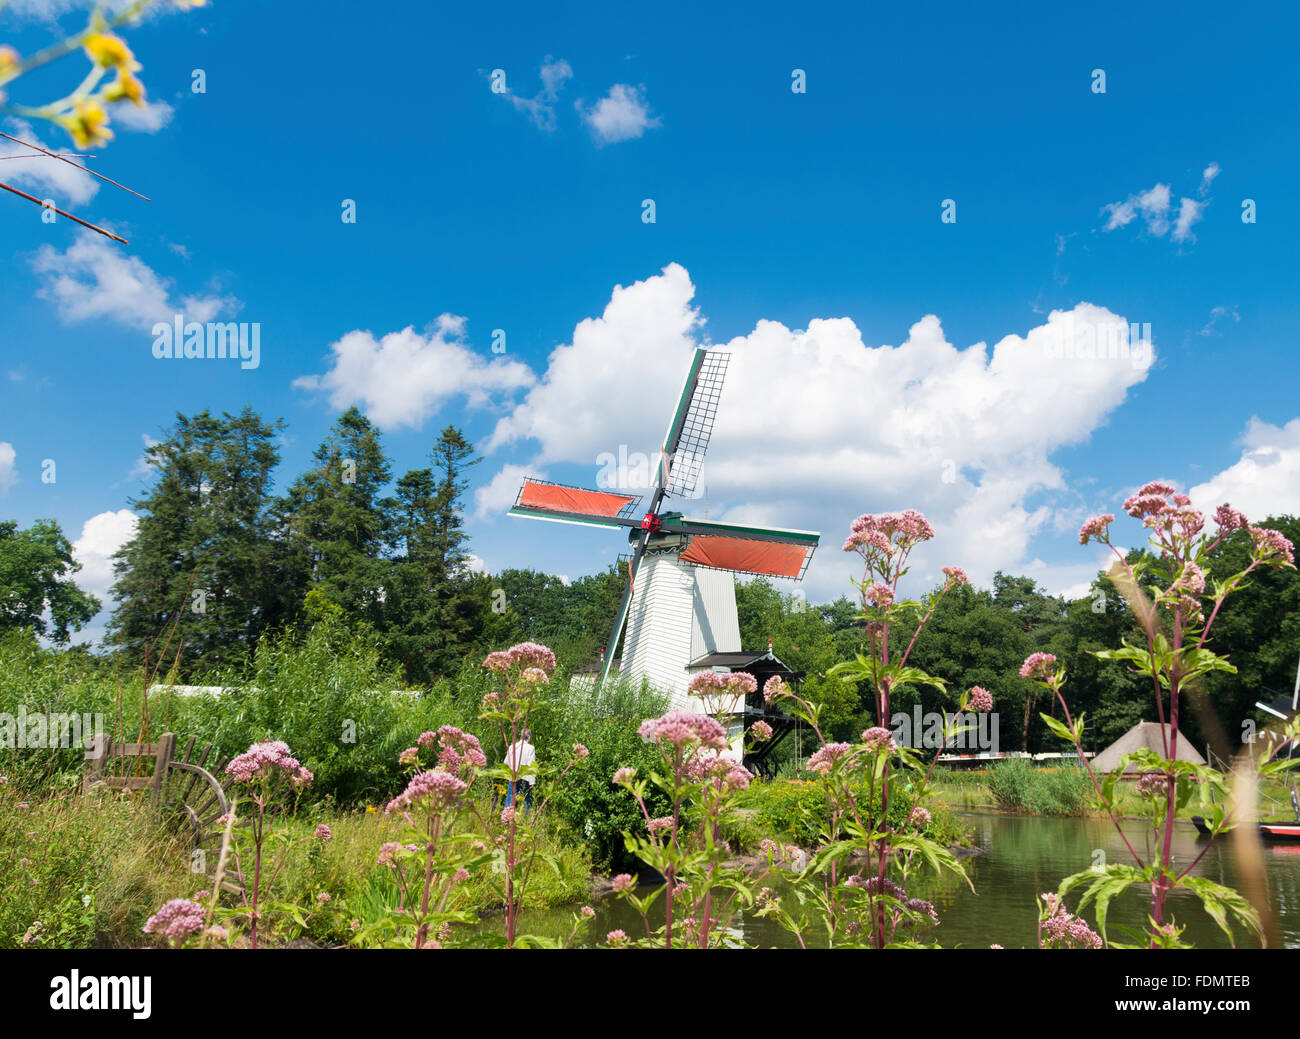 traditional dutch windmill in a rural surrounding Stock Photo